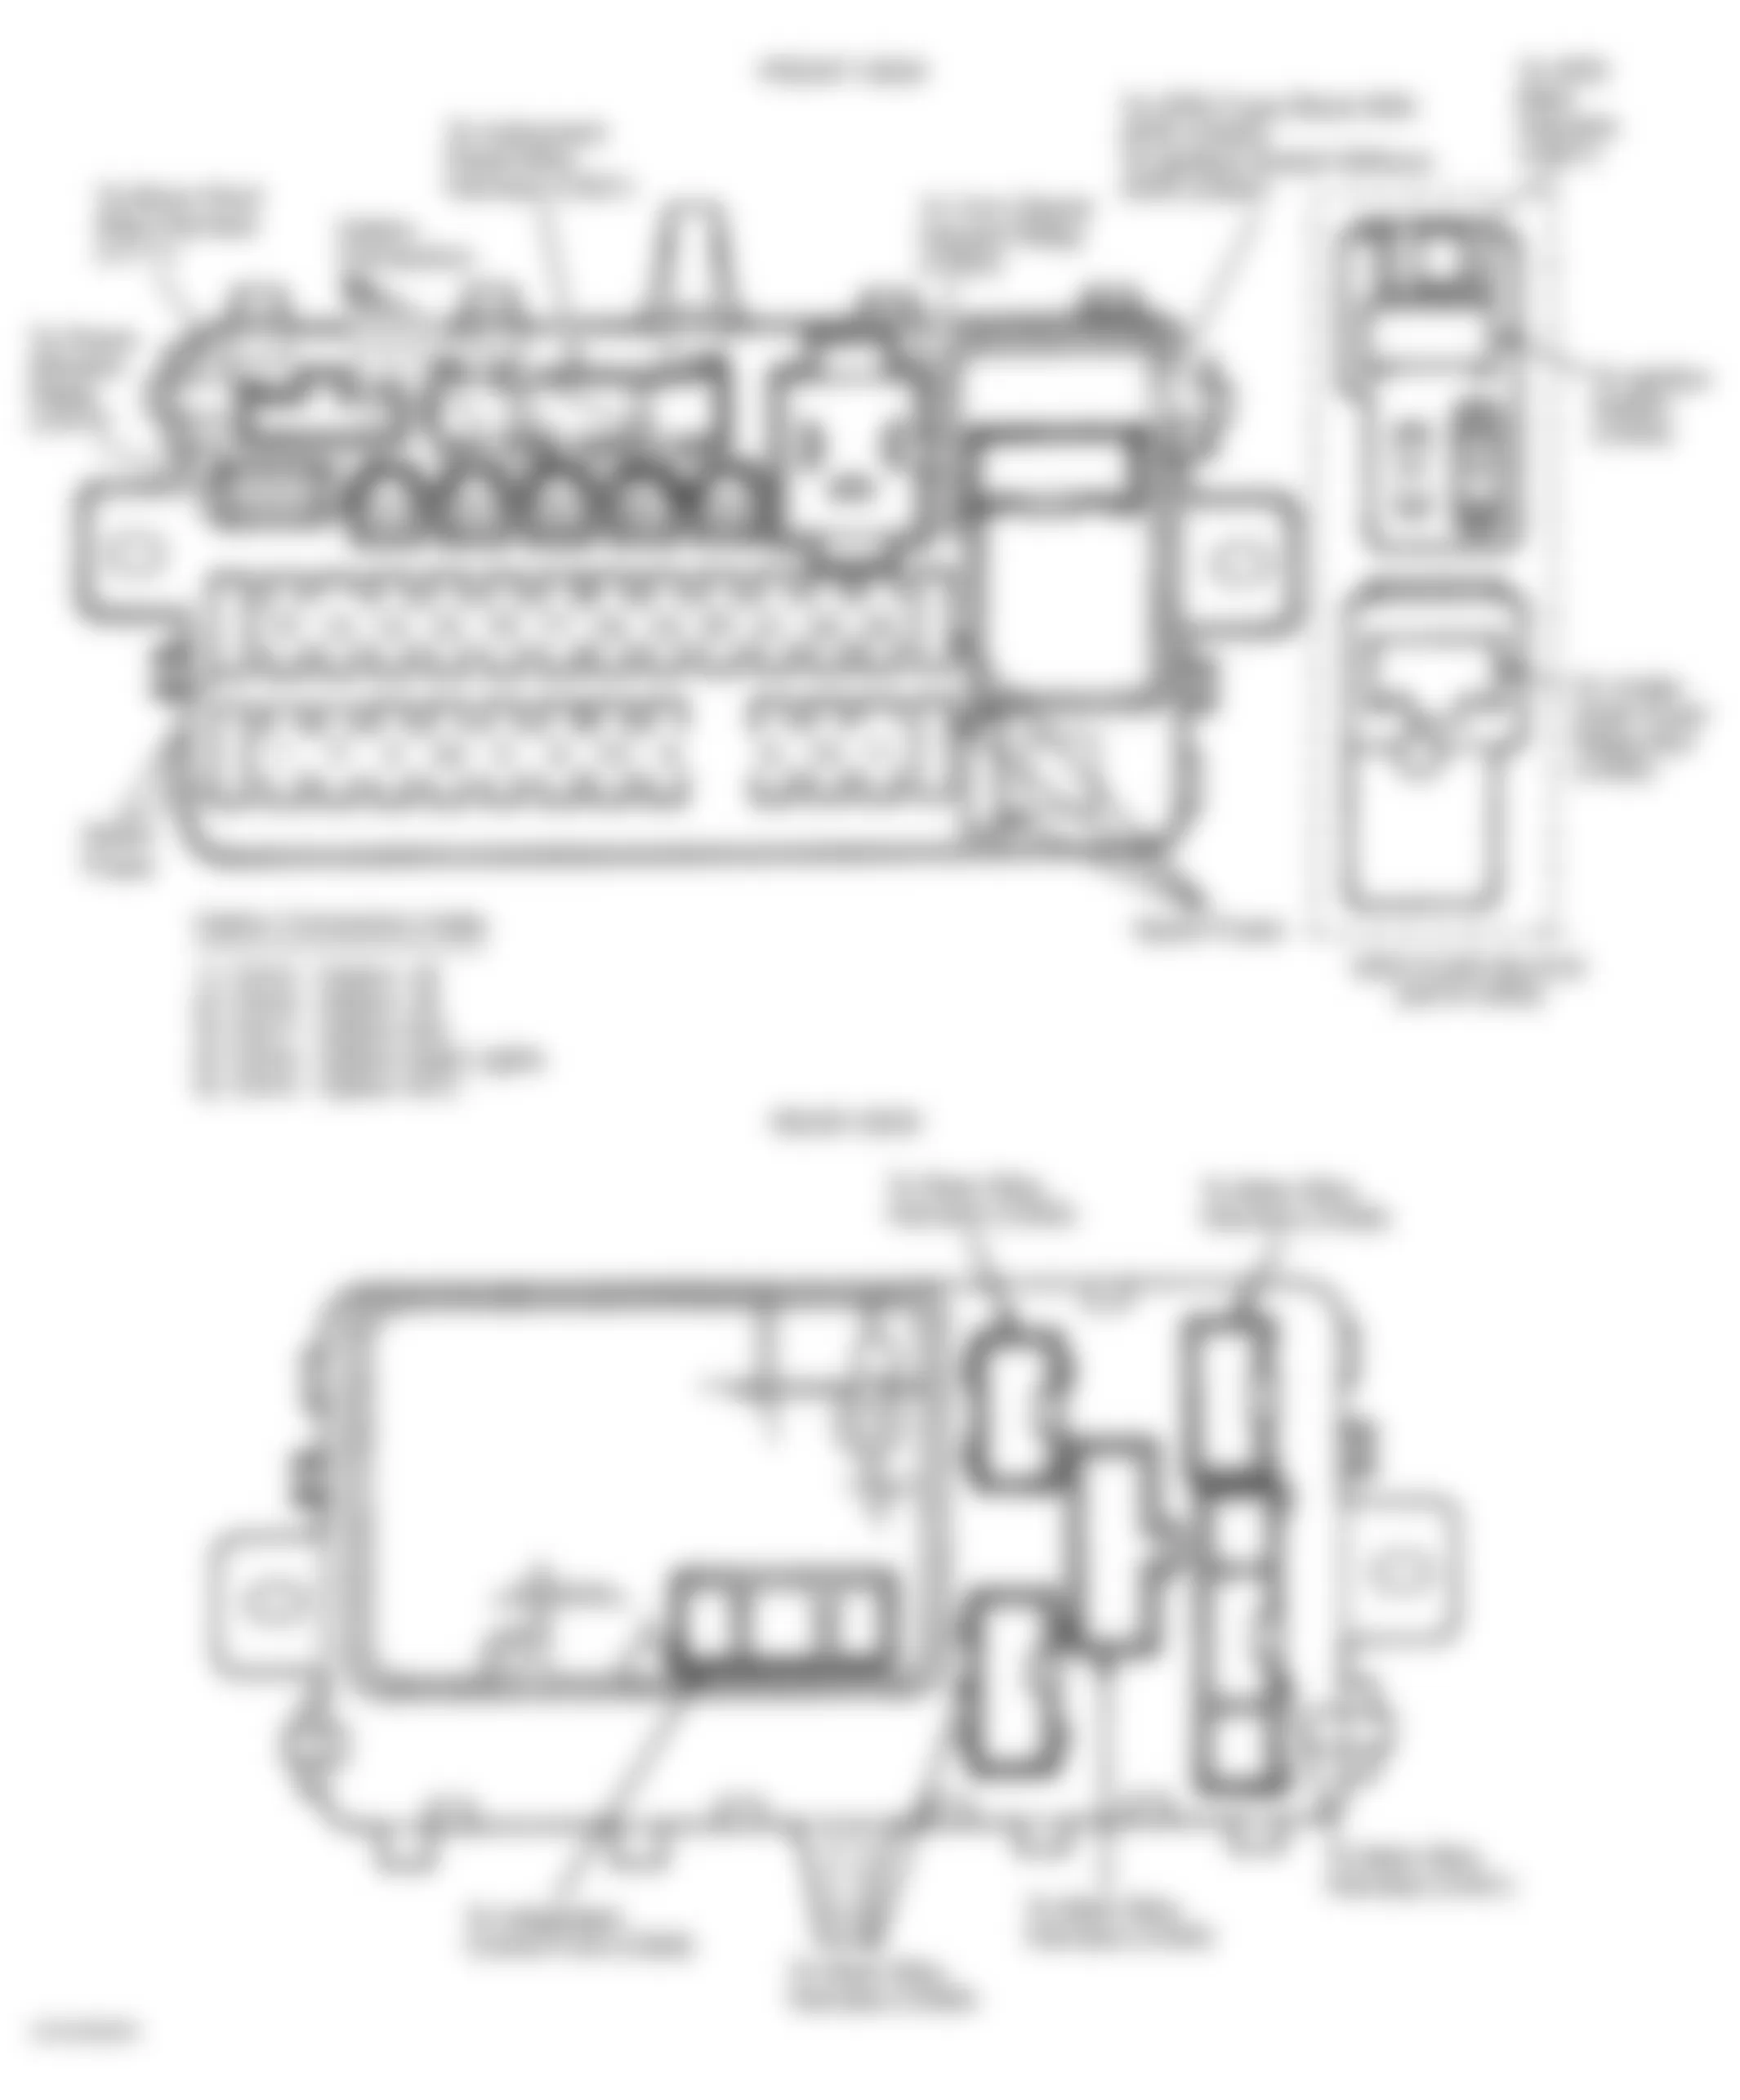 Honda Civic VX 1993 - Component Locations -  Identifying Under-Dash Fuse/Relay Box Components (1994-95 Civic)